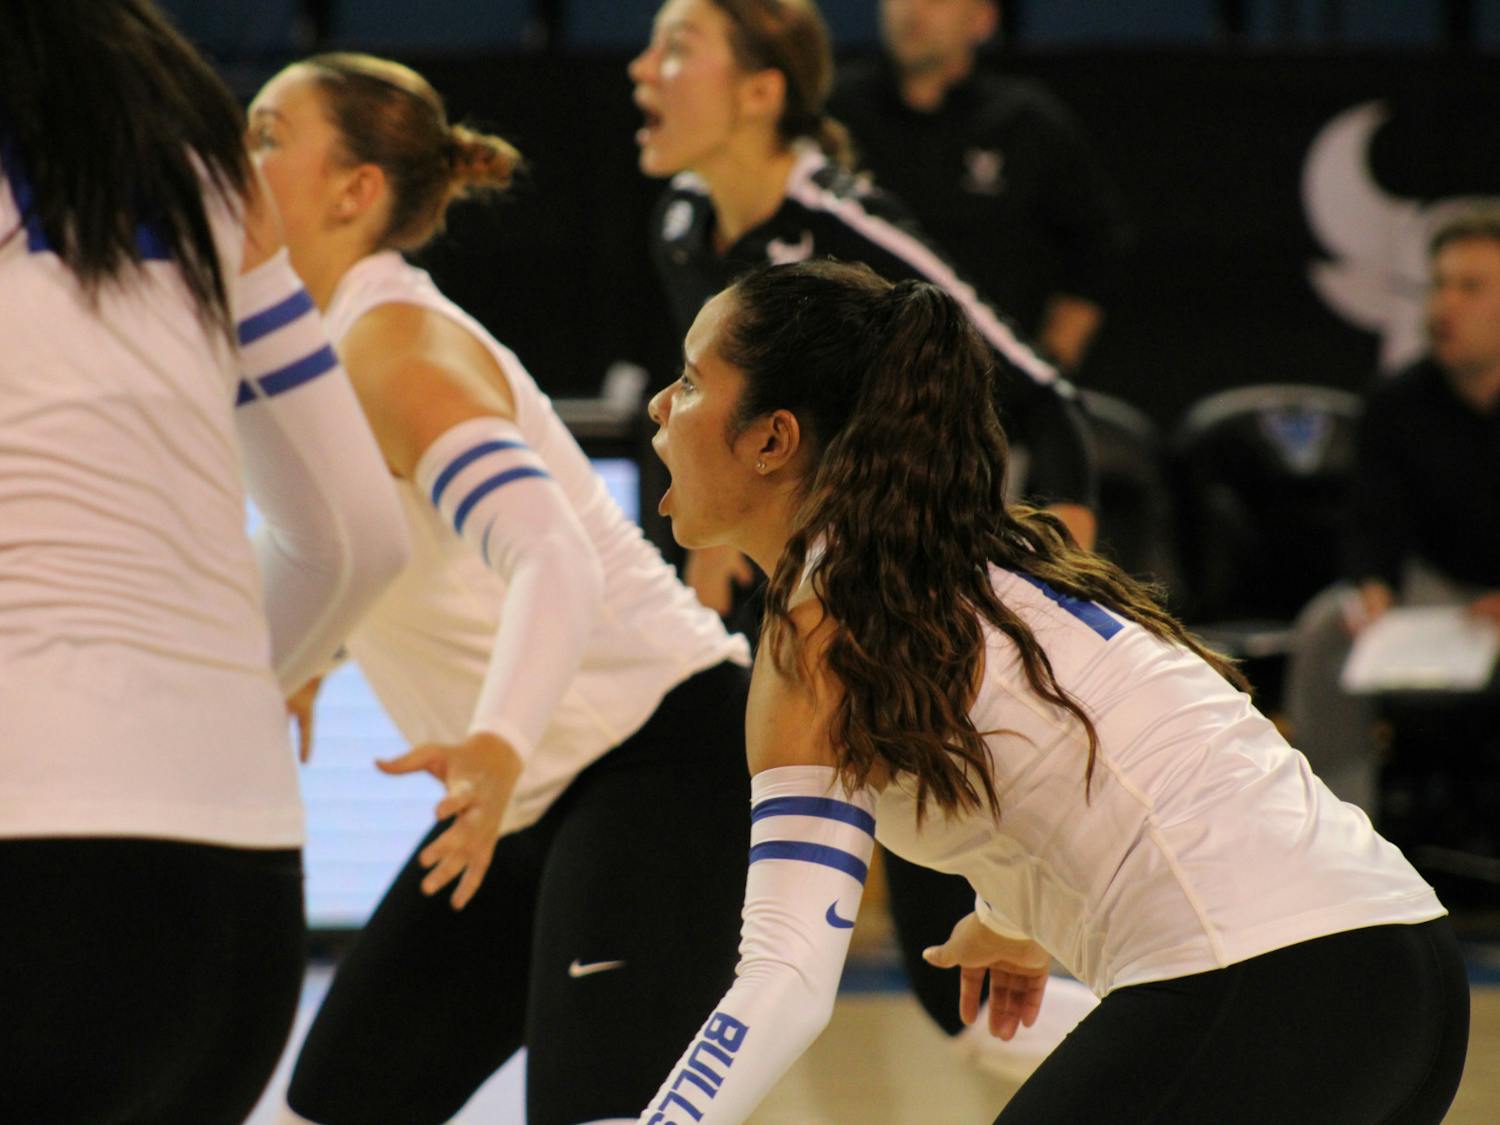 UB women's volleyball reached 10 conference wins this past weekend.